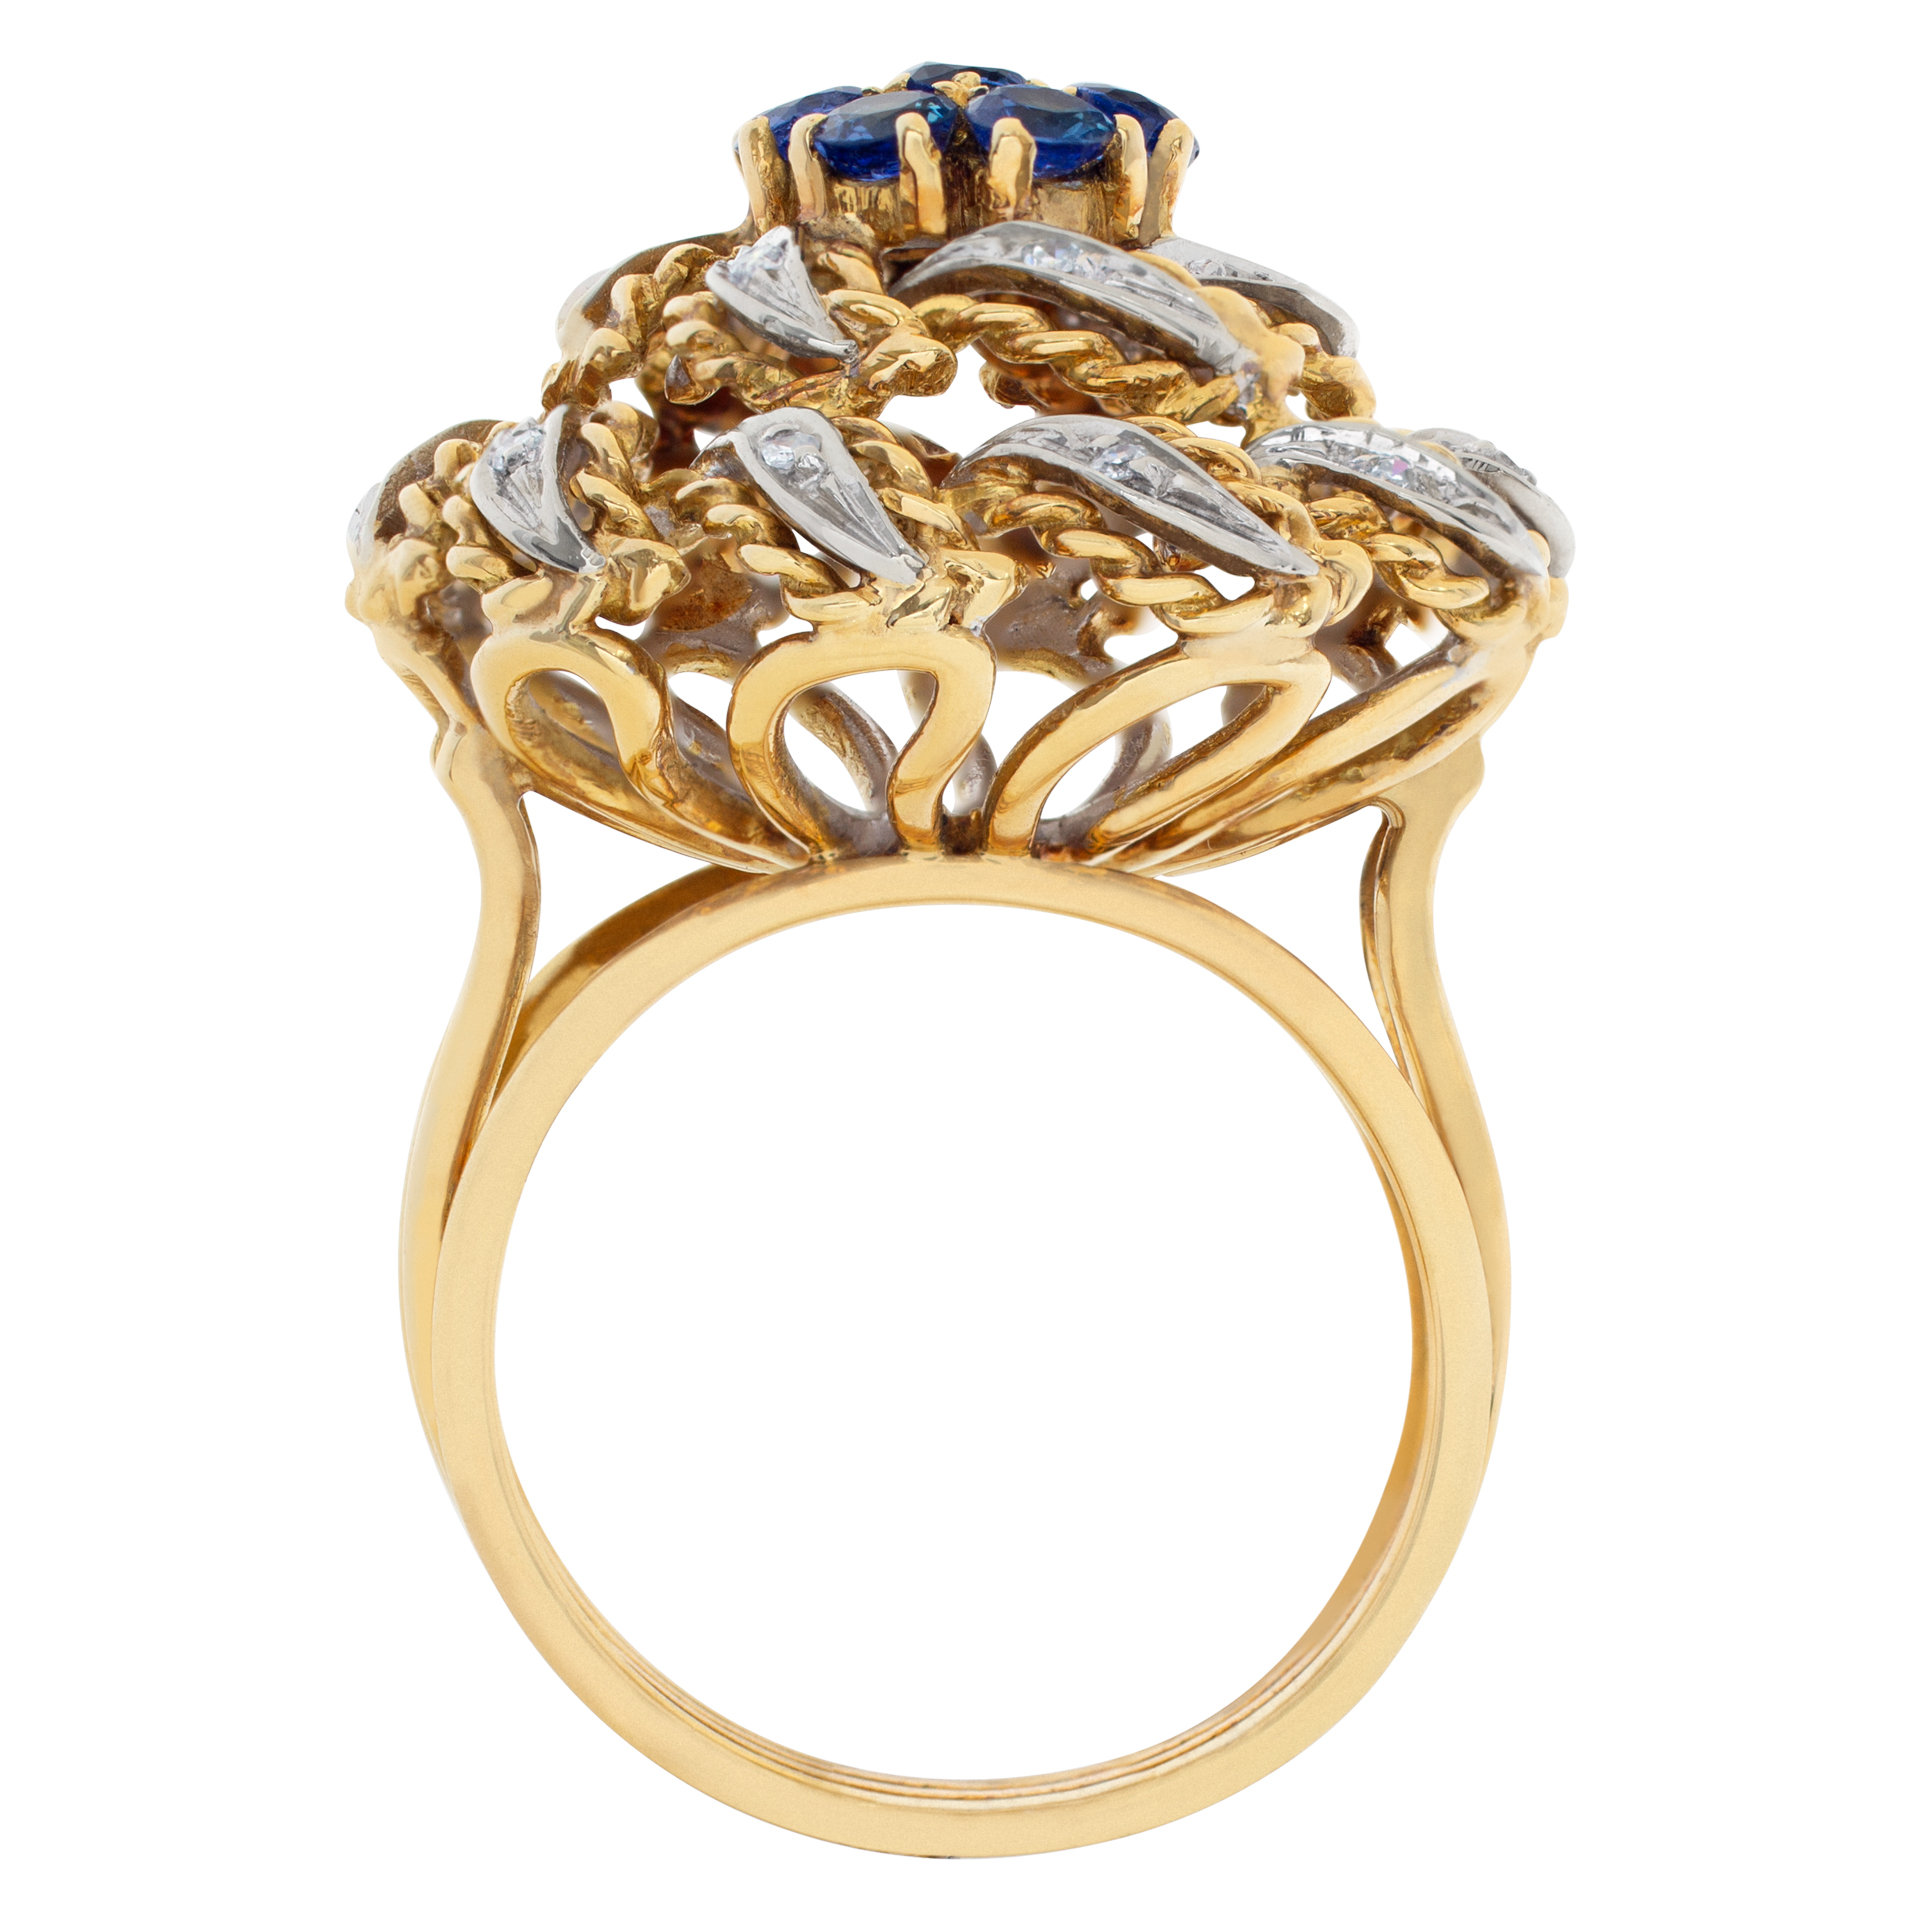 VIntage circa 1980's, Diamonds & Sapphire cocktail ring set in 18k white and yellow gold. image 4